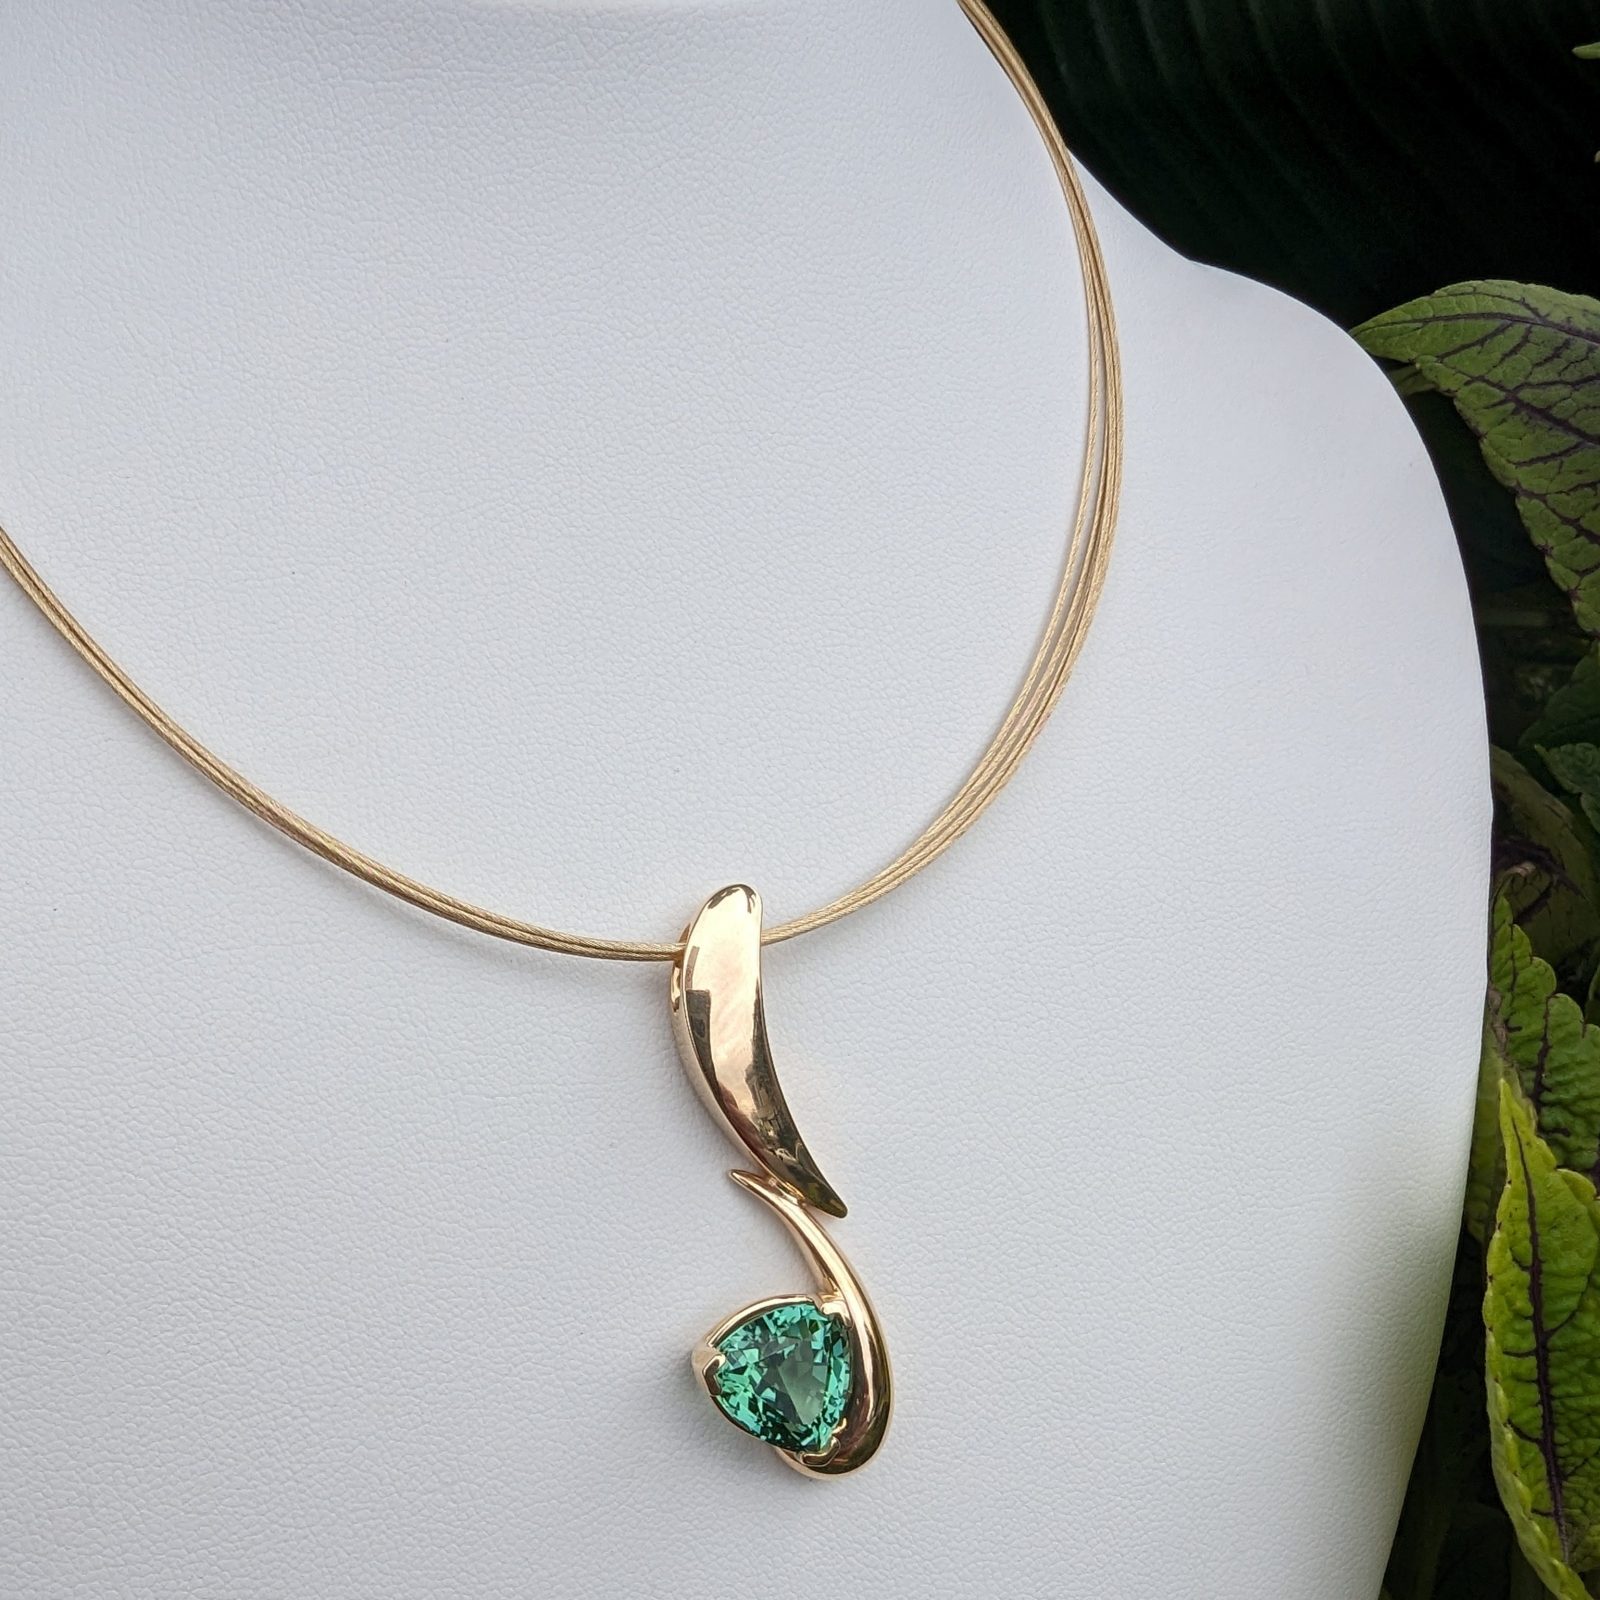 An emerald green pendant on a gold chain.